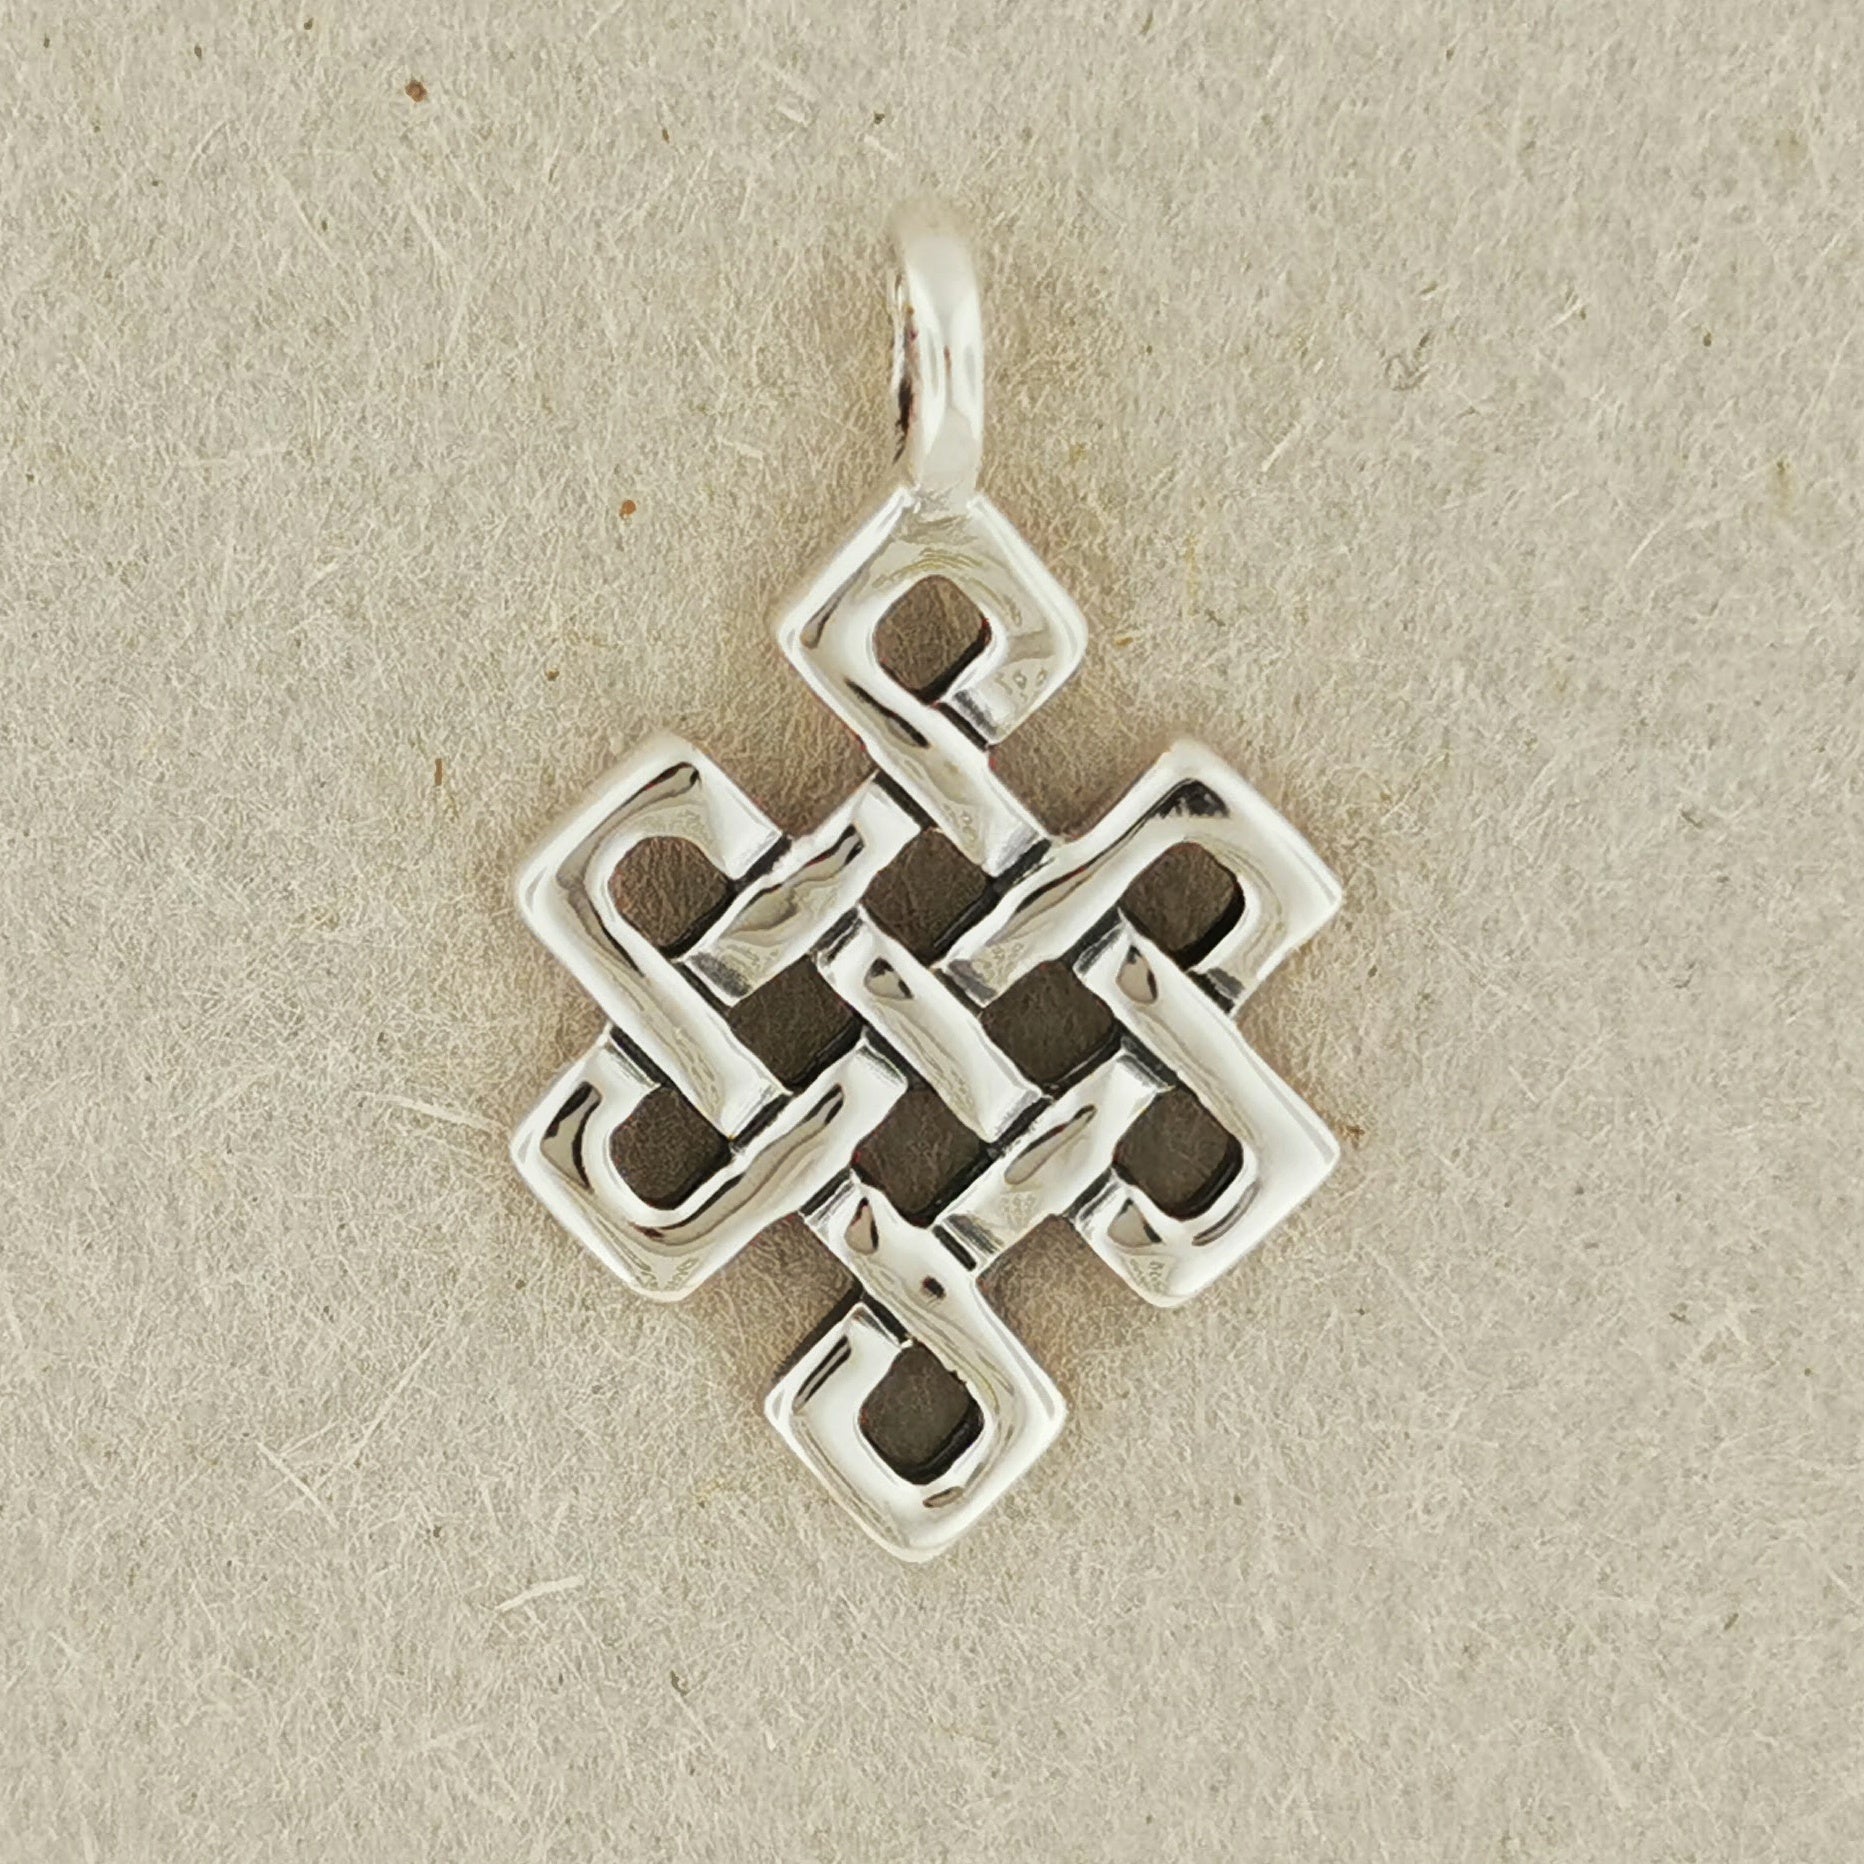 ndless Knot Pendant in Sterling Silver or Antique Bronze, Asian Knot Pendant, Celtic Knot Pendant, Celtic Knotwork Pendant, Asian Knotwork Pendant, Silver Shrivatsa Pendant, Bronze Shrivatsa Pendant, Silver Endless Knot Pendant, Bronze Endless Knot Pendant, Silver Celtic Knot, Bronze Celtic Knot 